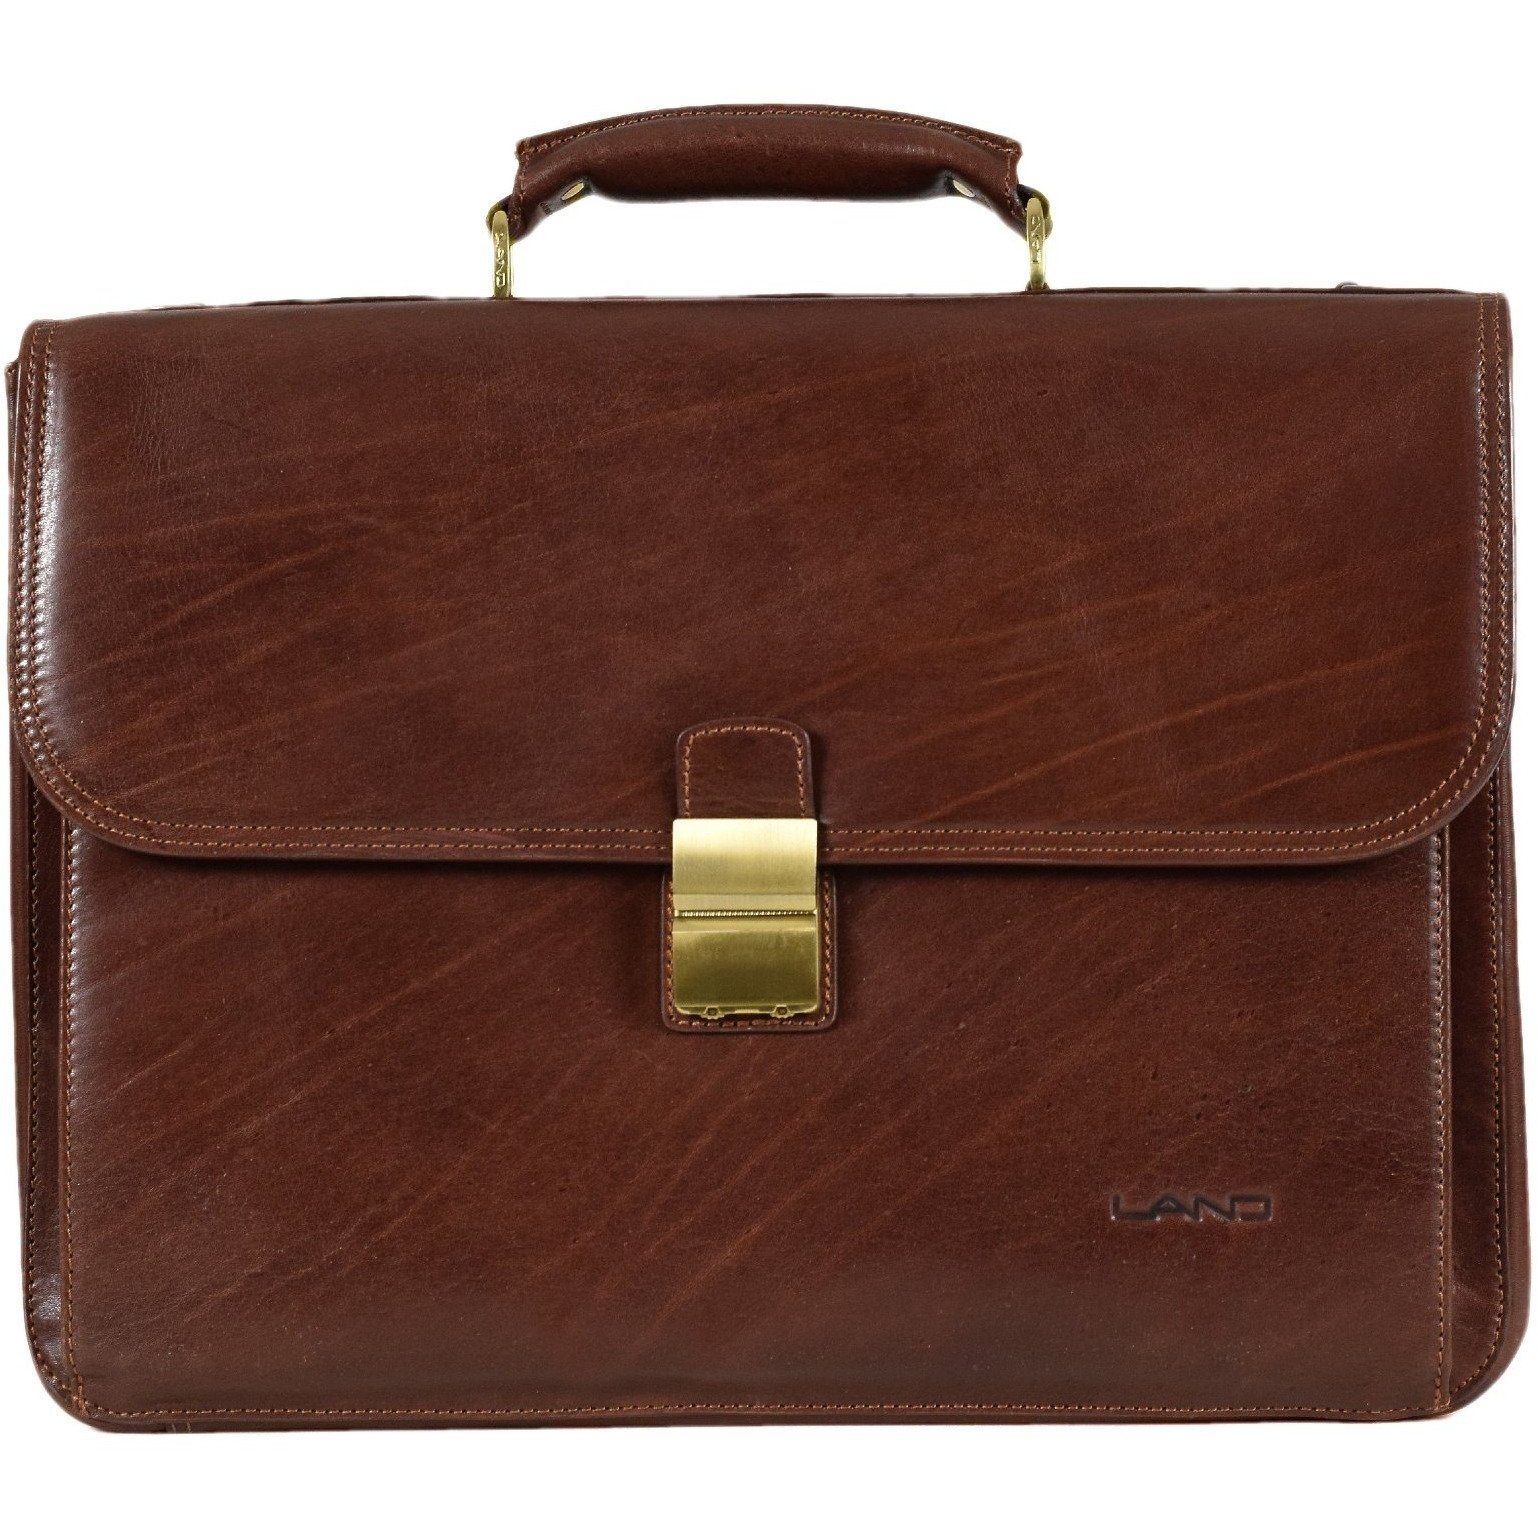 Limited Roosevelt Business Briefcase - LAND Leather Goods